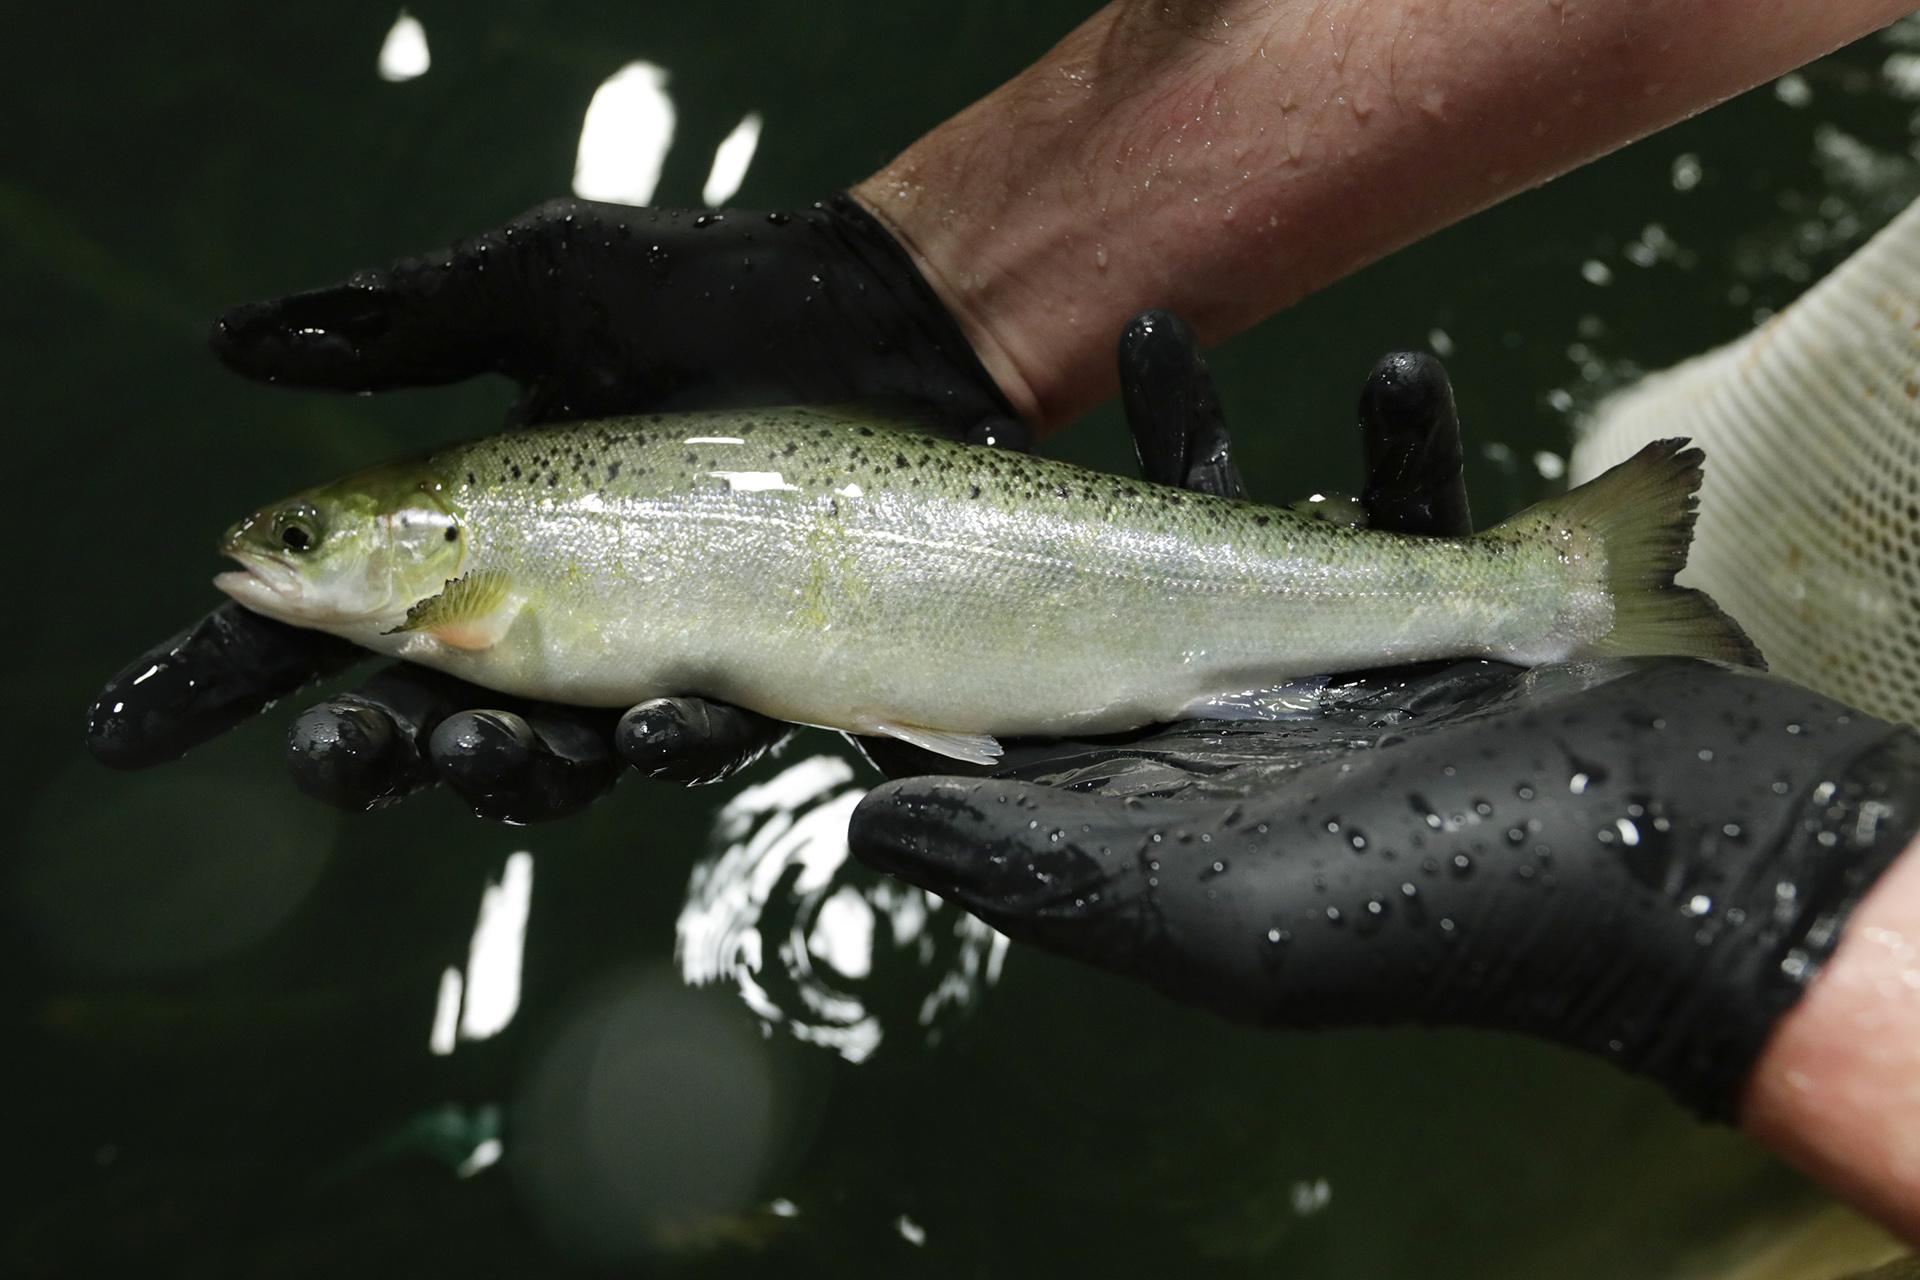 Peter Bowyer, the facility manager at AquaBounty Technologies, holds one of the last batch of conventional Atlantic salmon raised at the commercial fish farm in Albany, Indiana on Wednesday, June 19, 2019. (AP Photo / Michael Conroy)